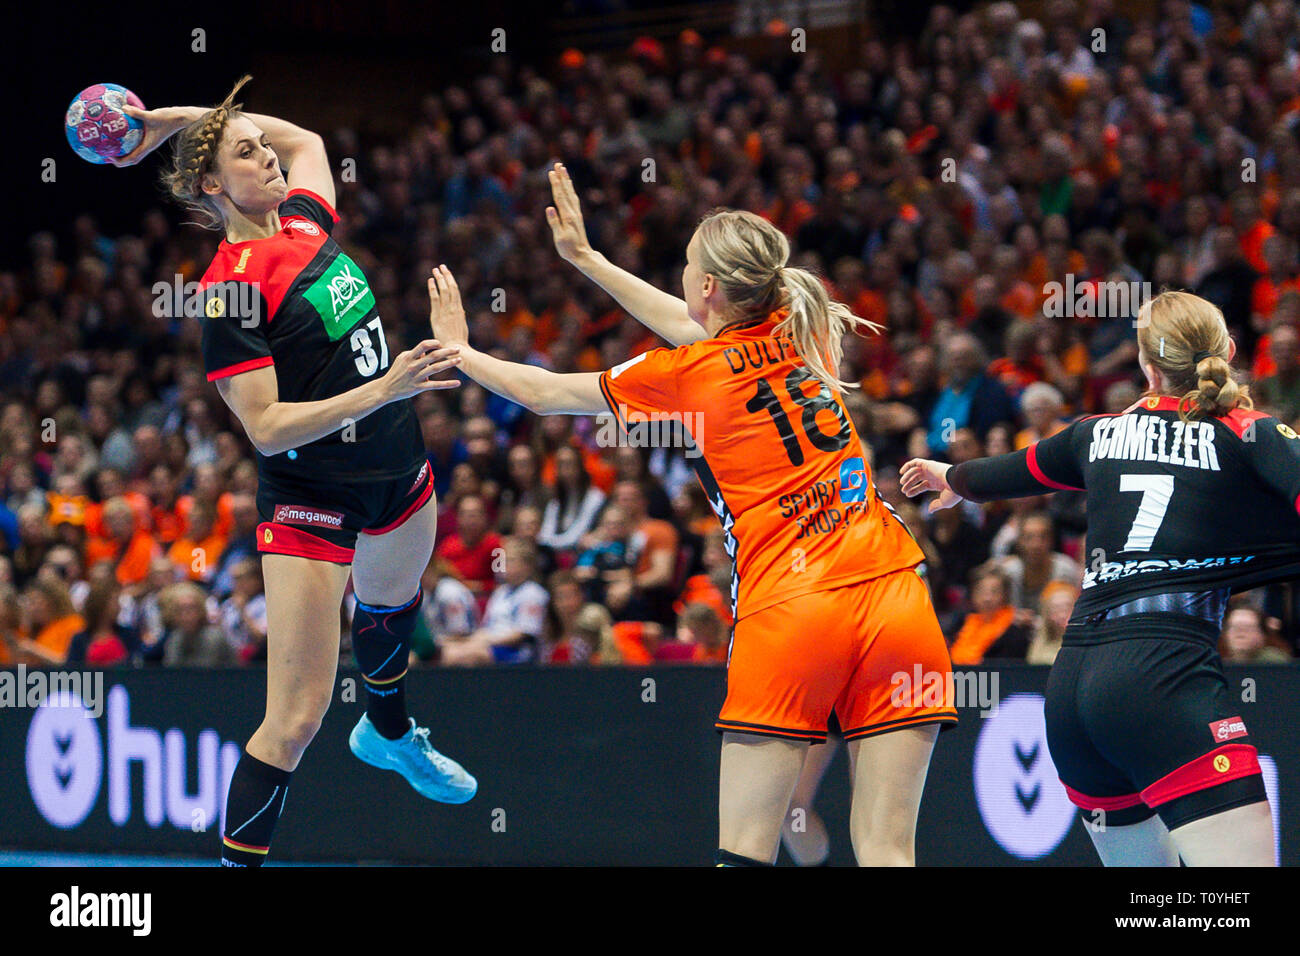 22 March 2019, Netherlands, Groningen: Handball, women: International, Netherlands - Germany: Alicia Stolle (l) and Meike Schmelzer (r) from Germany against Kelly Dulfer (M) from the Netherlands in action. Photo: Marco Wolf/wolf-sportfoto/dpa Stock Photo